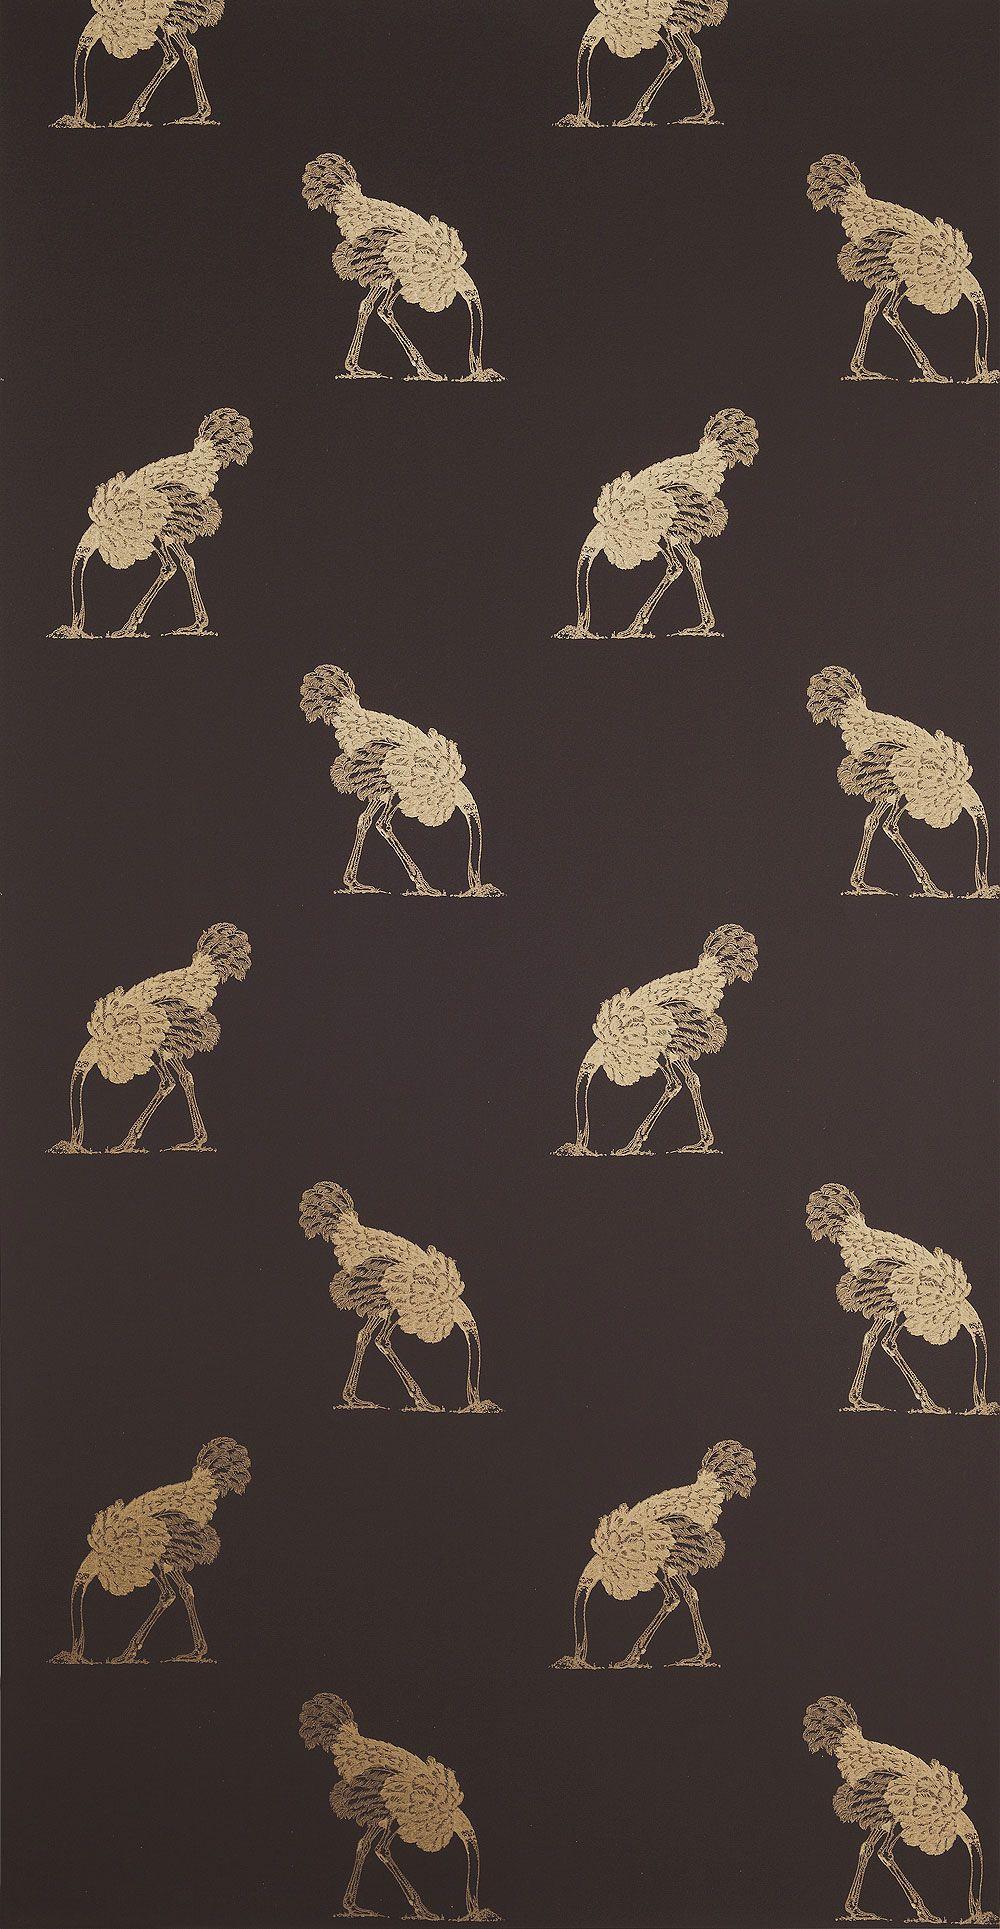 Ostrich Wallpaper. Beware the Moon. Made in England